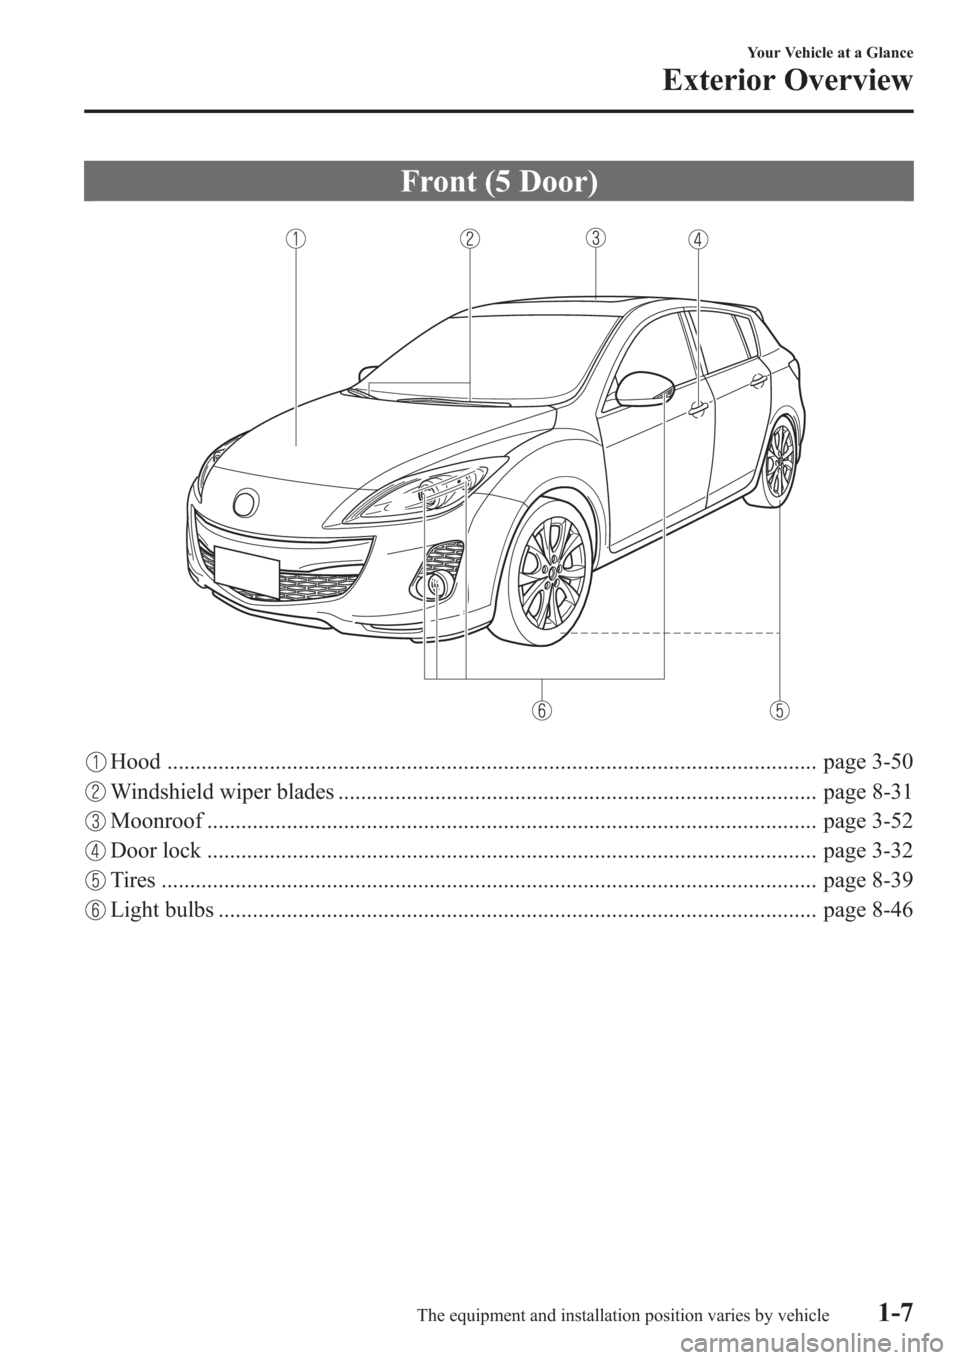 MAZDA MODEL 3 HATCHBACK 2013  Owners Manual (in English) Front (5 Door)
Hood .................................................................................................................. page 3-50
Windshield wiper blades ...............................